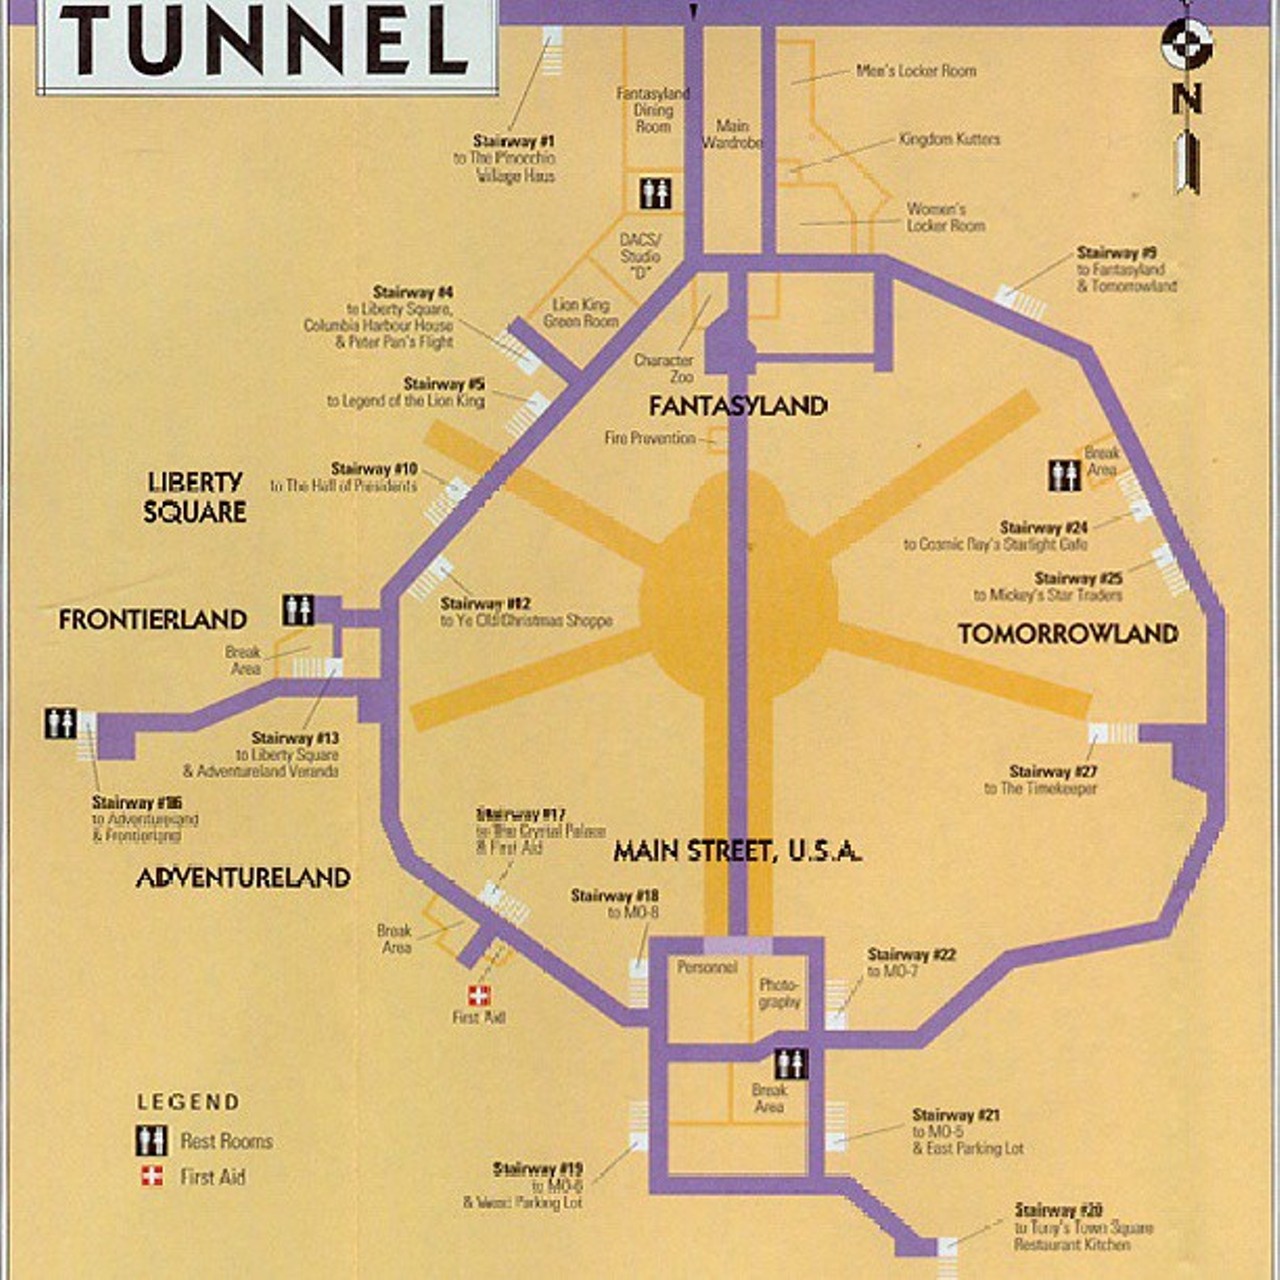 Everybody knows Walt Disney World has underground tunnels called Utilidors, which are used for cast members to get around without being seen by guests. But have you ever seen a map of them?